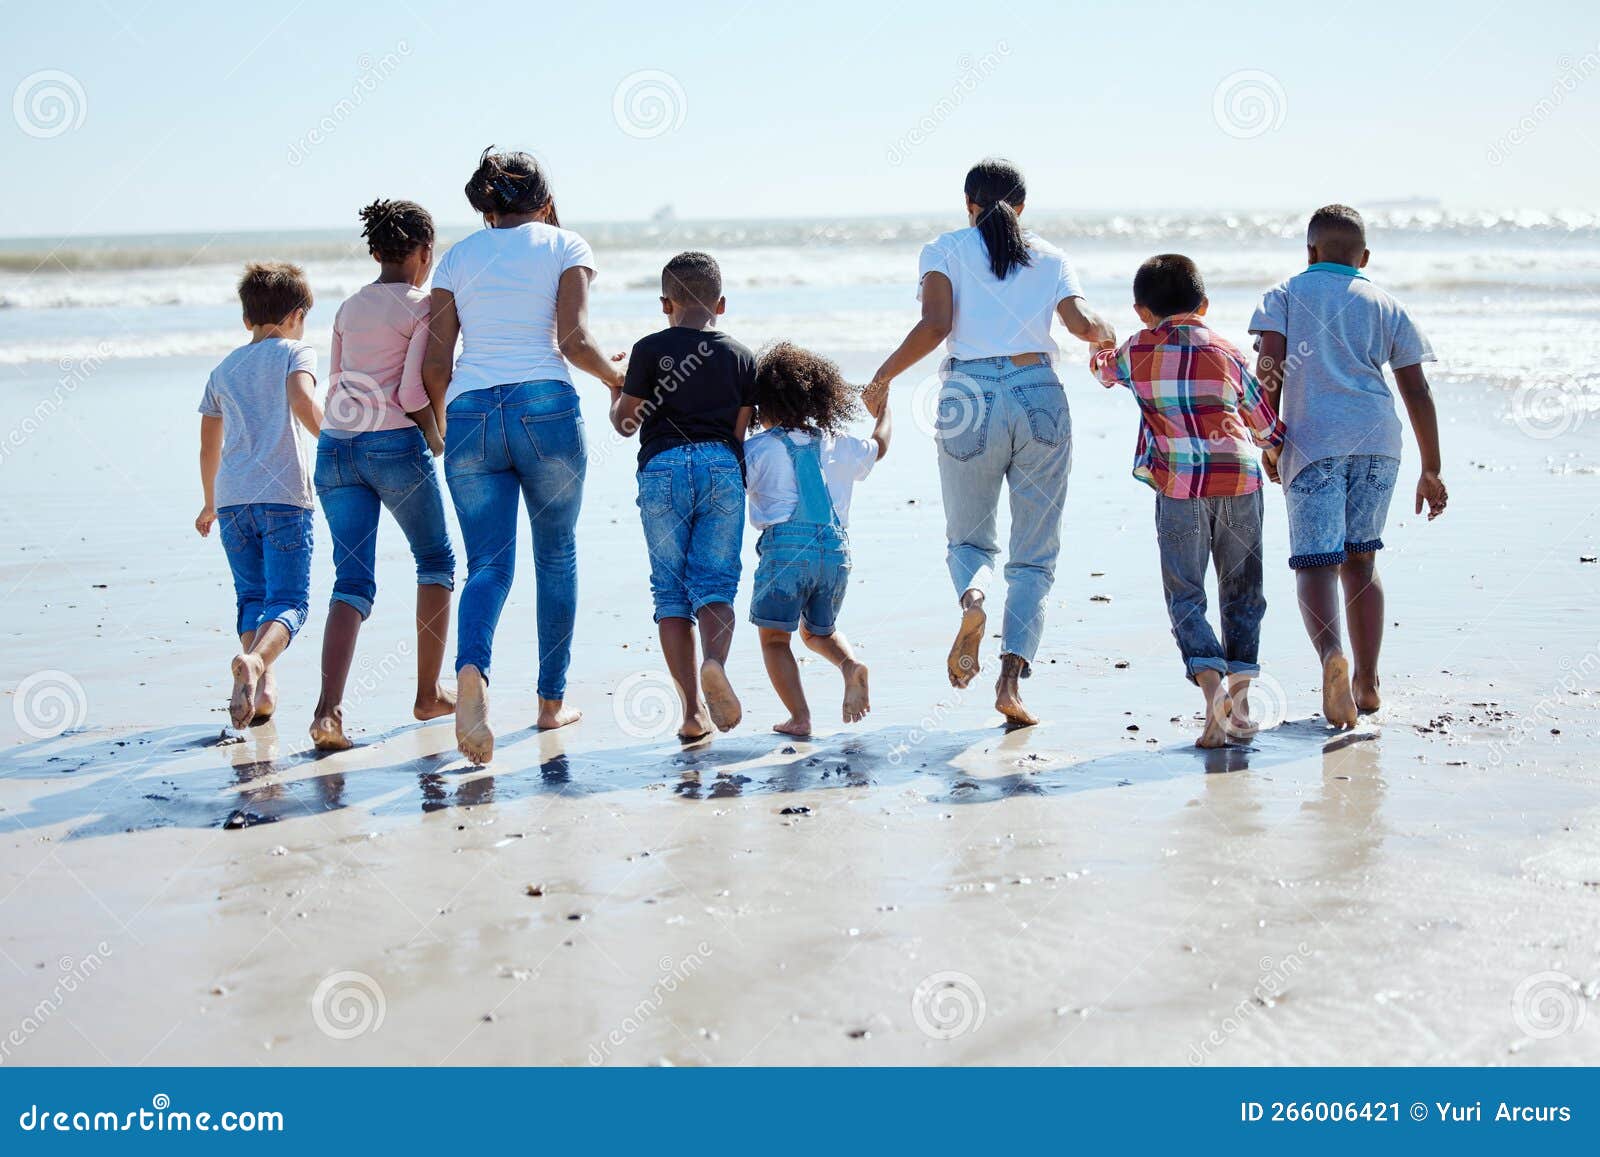 Big Family, Beach Walk and Water for Vacation, Sunshine and Bonding with Interracial Diversity by Waves picture